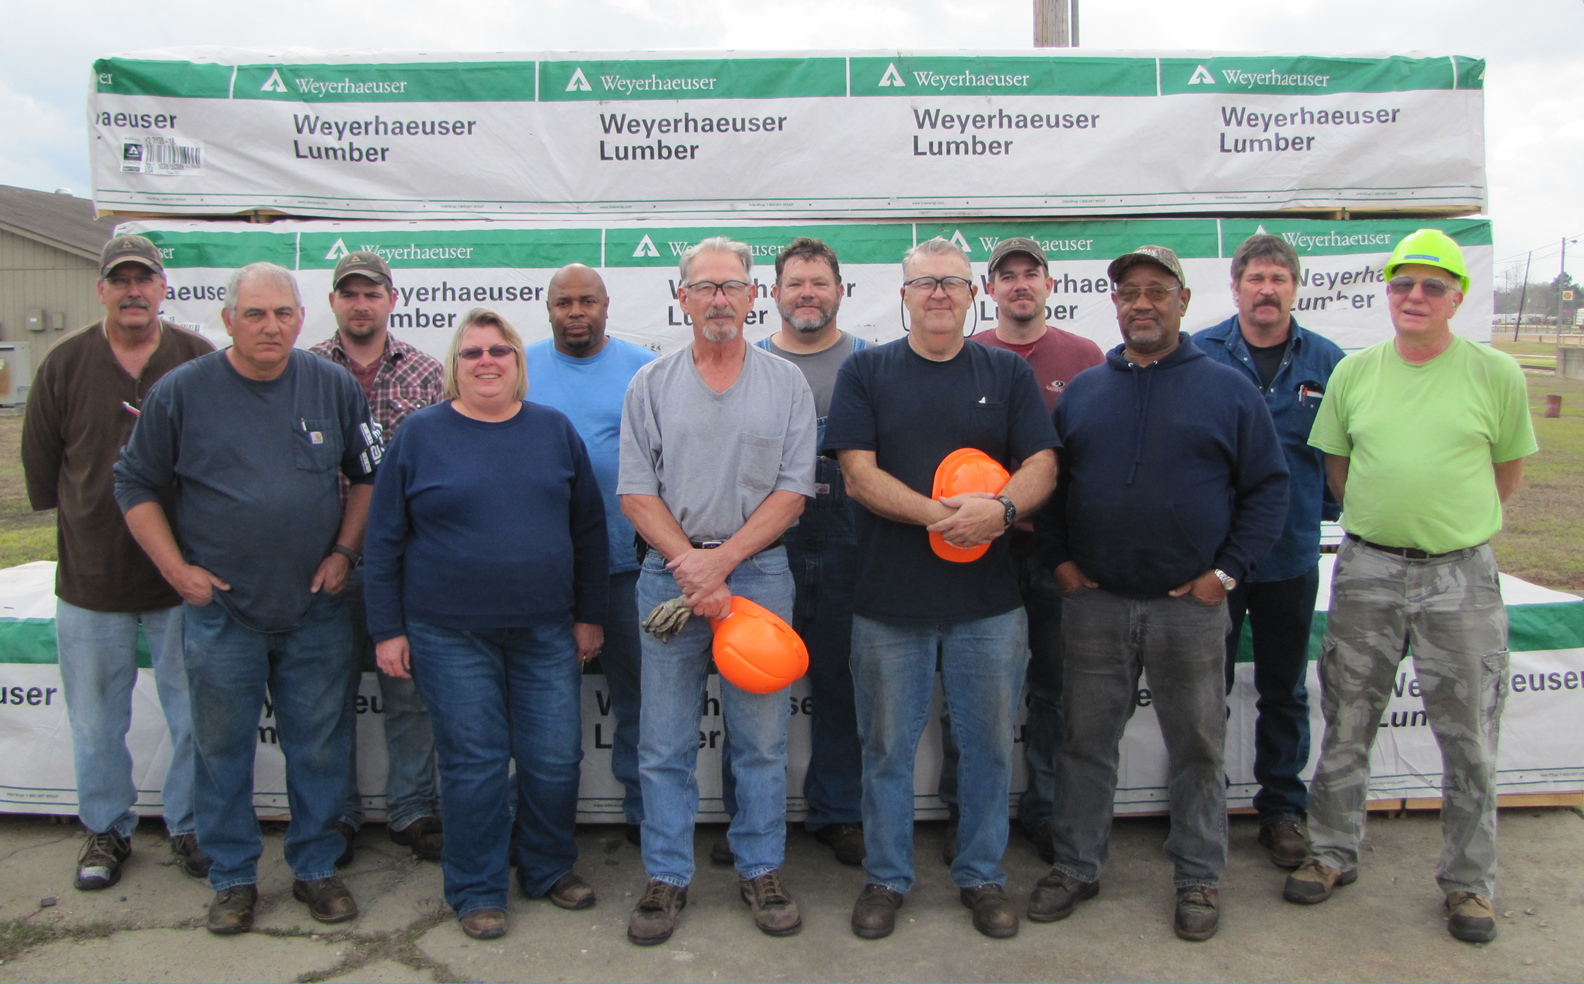 The Shipping team at the Weyerhaeuser Company in Dierks has a safety record of 23 years without a recordable injury. During this time, the team safely shipped 5,468,661 board feet of lumber to their customers. Team members are (Front row): Joe Isham, Cheryl Hughes, Ted Croasdel, Gary Frost, Eddie Williams, Thomas Harris (Back row): James Wray, Justin Cook, Marcus Lacey, Chuck Leathers, Steven Barbre, and Donnie Reid. 